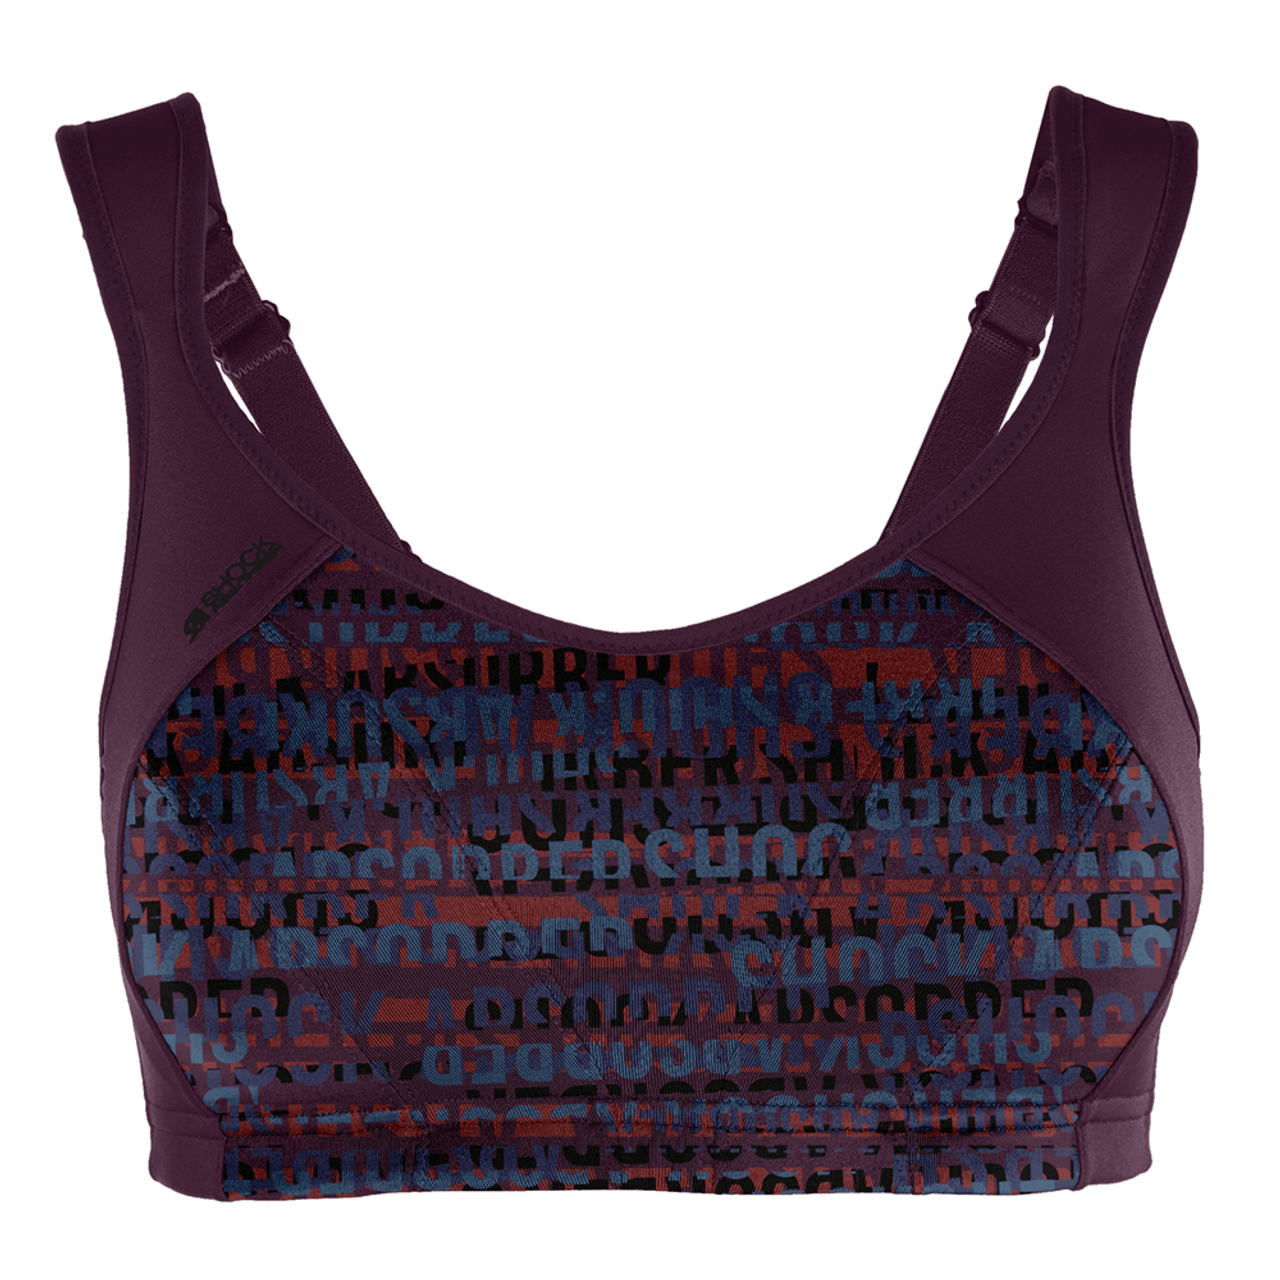 https://cdn11.bigcommerce.com/s-djrcrpfcx0/images/stencil/1280x1280/products/122/459/S4490_shock_absorber_active_multi_sports_support_bra_cranberry_logo_print_1__68857.1572371520.png?c=2?imbypass=on